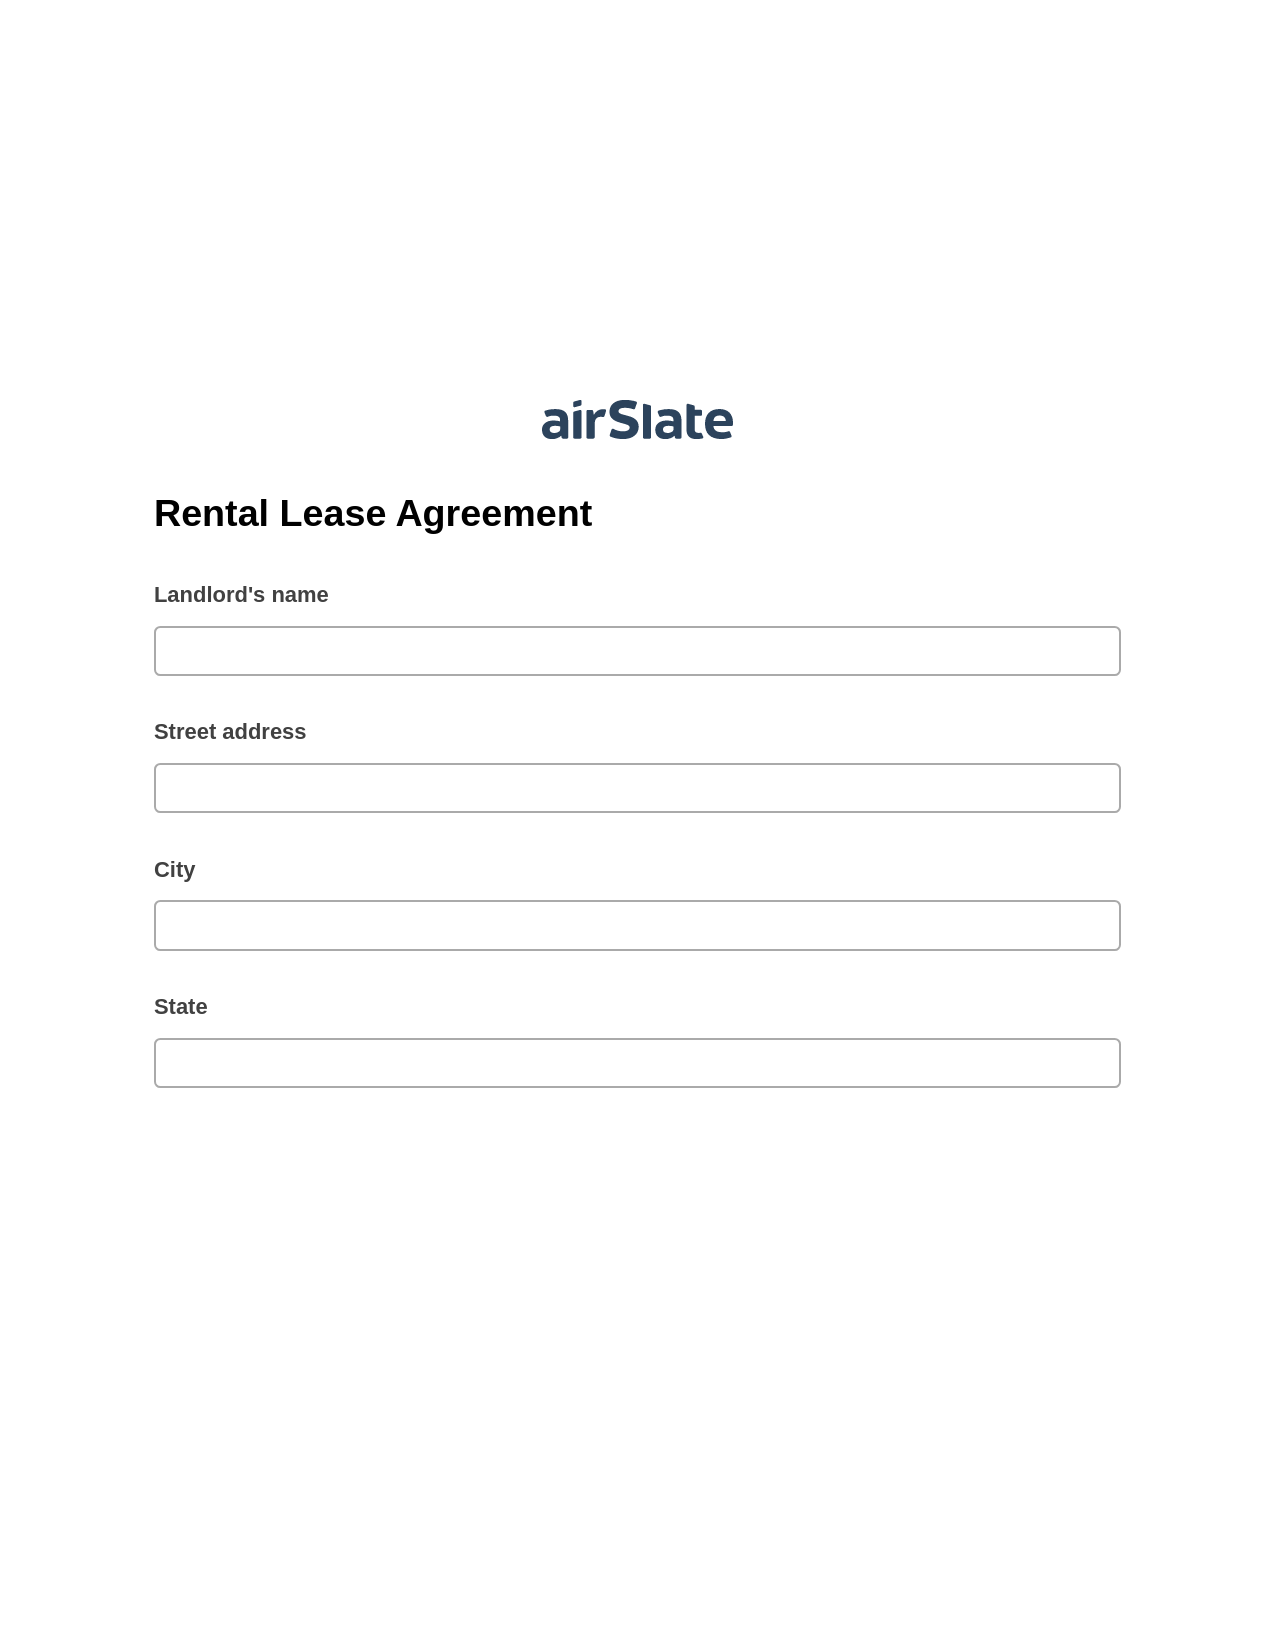 Rental Lease Agreement Pre-fill from Google Sheets Bot, Jira Bot, Export to Excel 365 Bot